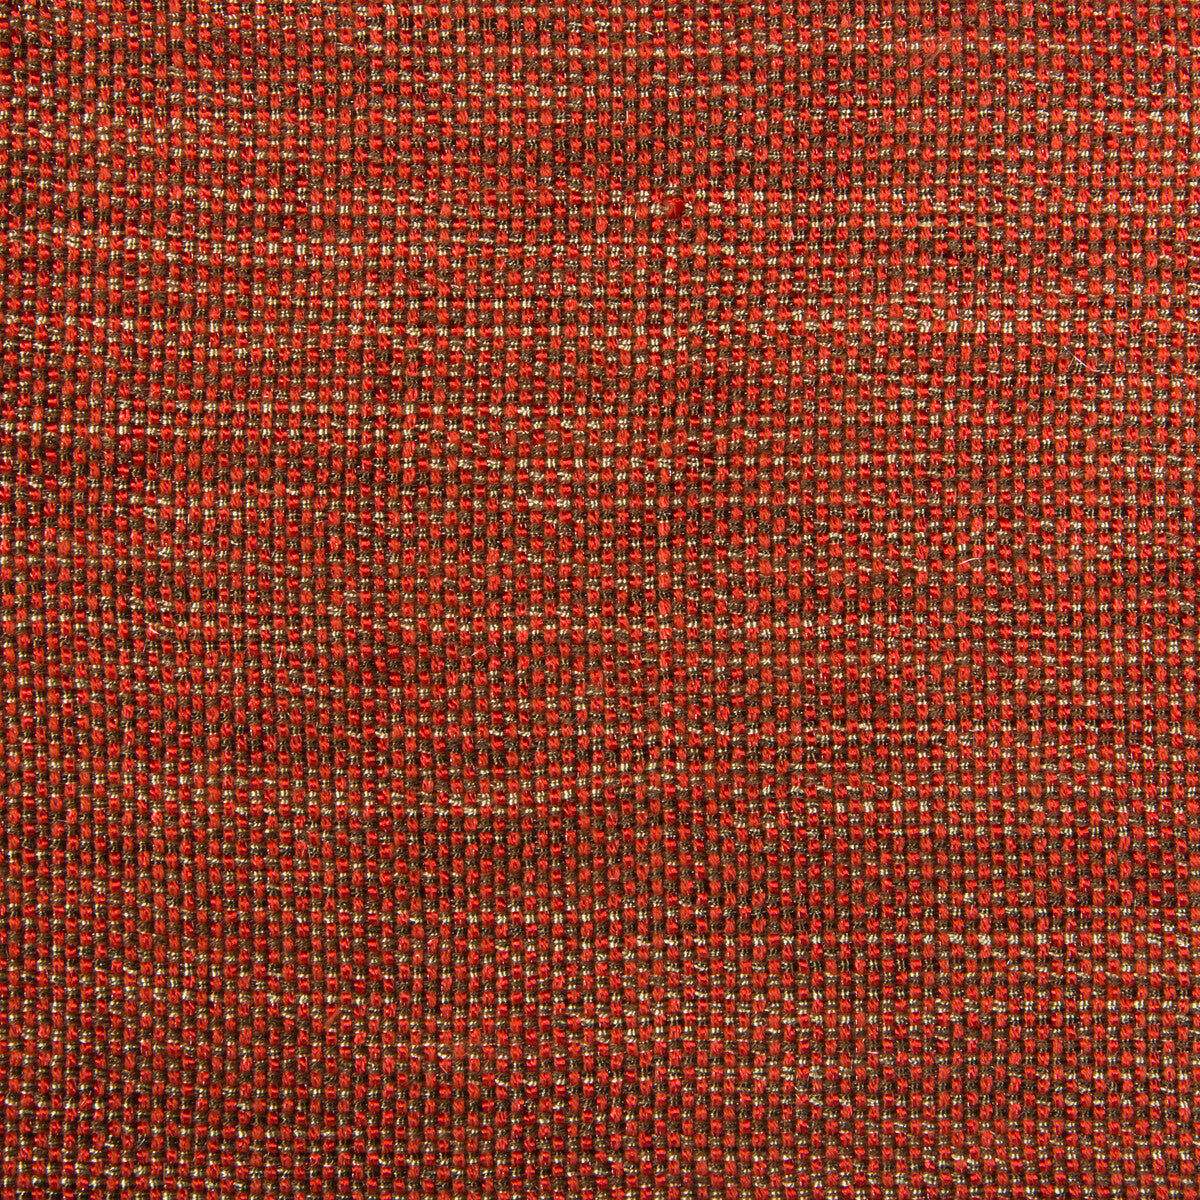 Kravet Contract fabric in 34926-619 color - pattern 34926.619.0 - by Kravet Contract